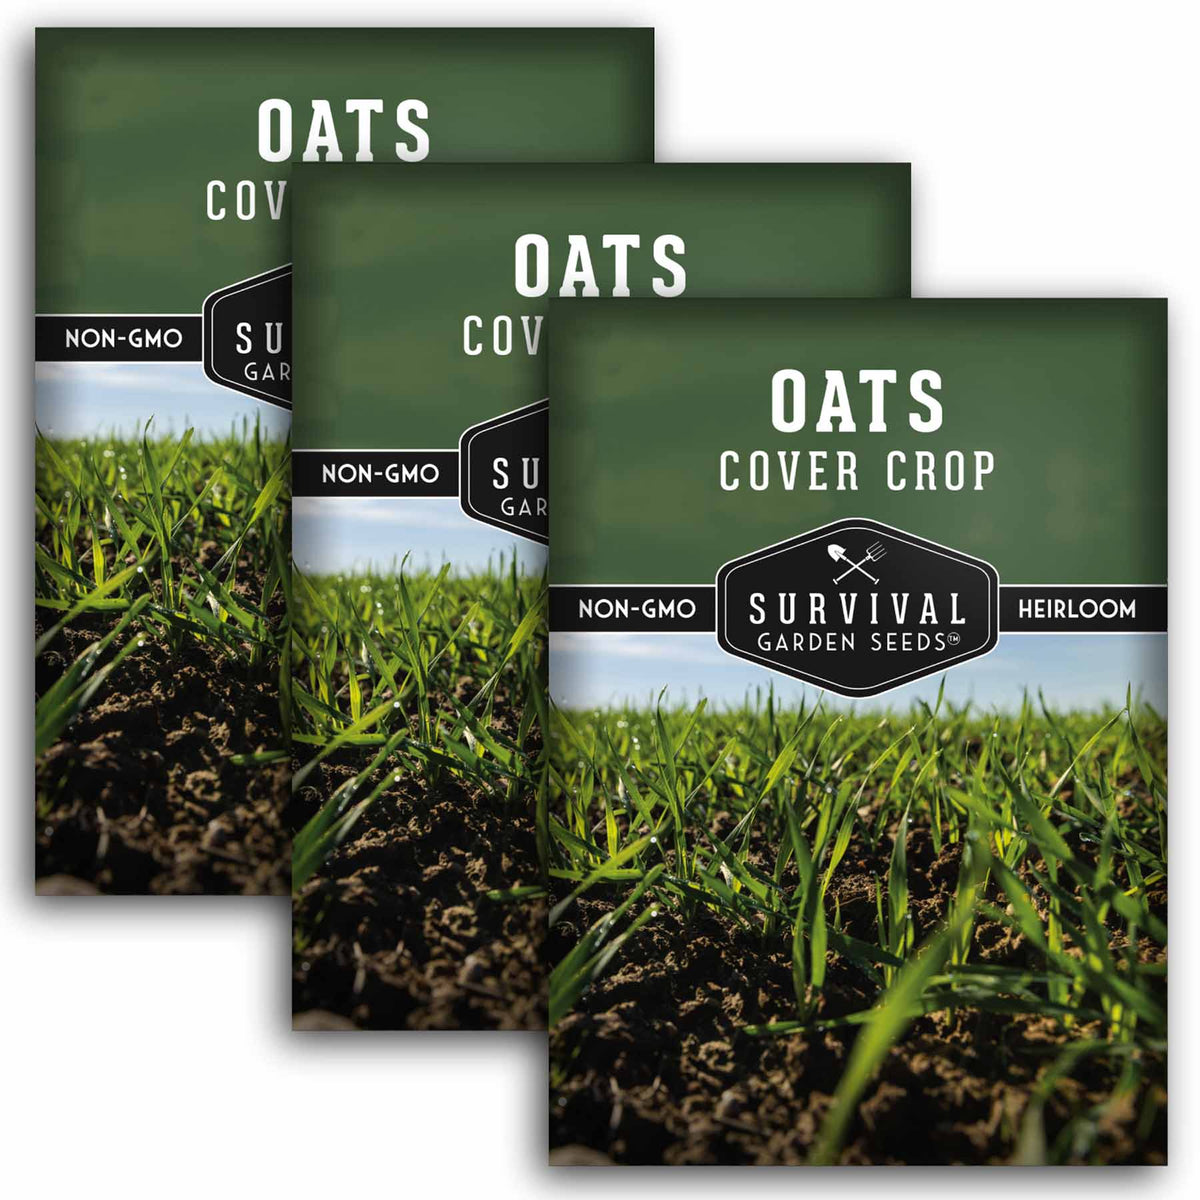 3 packets of Oat seeds